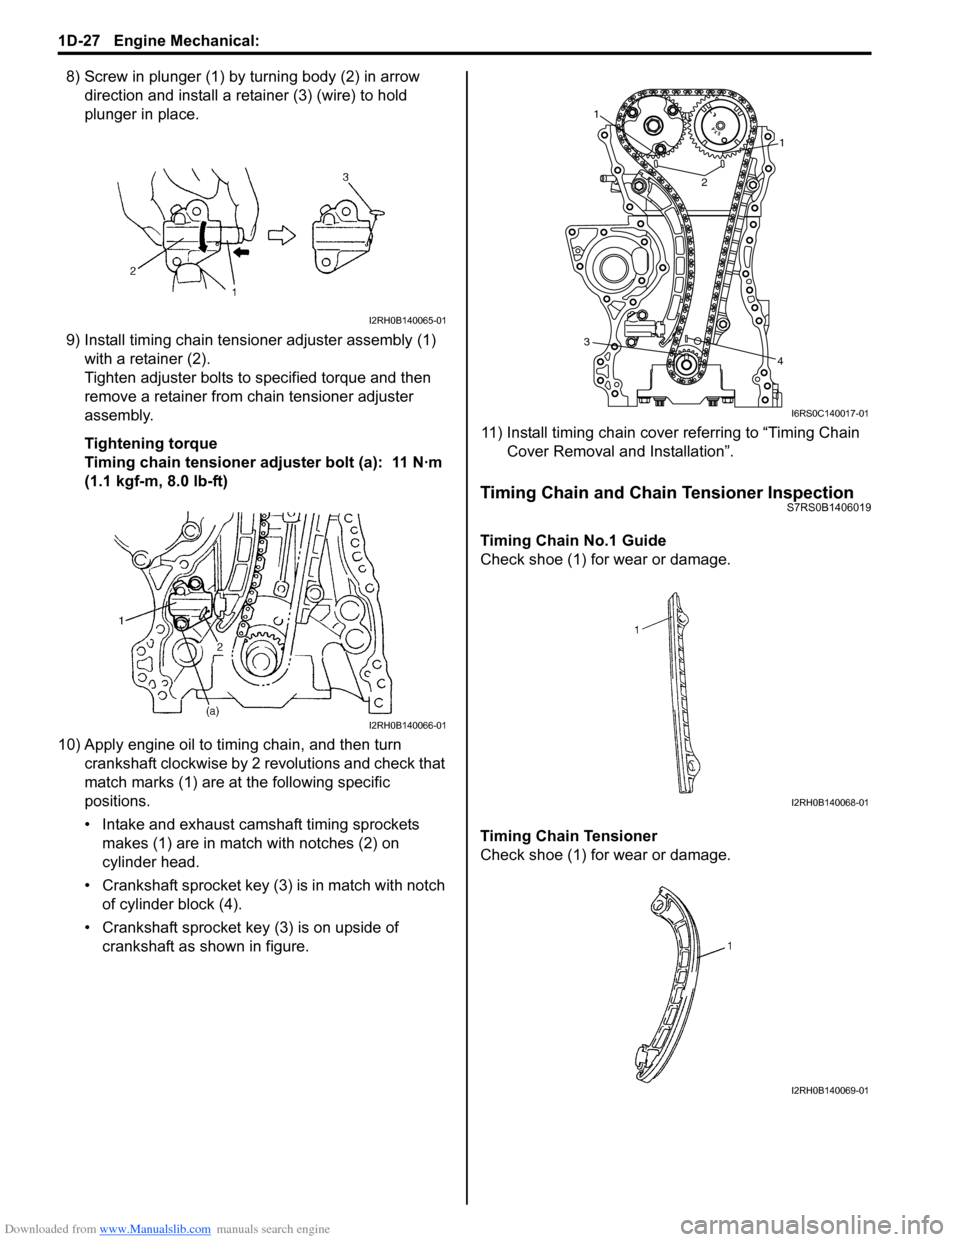 SUZUKI SWIFT 2008 2.G Service Workshop Manual Downloaded from www.Manualslib.com manuals search engine 1D-27 Engine Mechanical: 
8) Screw in plunger (1) by turning body (2) in arrow direction and install a reta iner (3) (wire) to hold 
plunger in